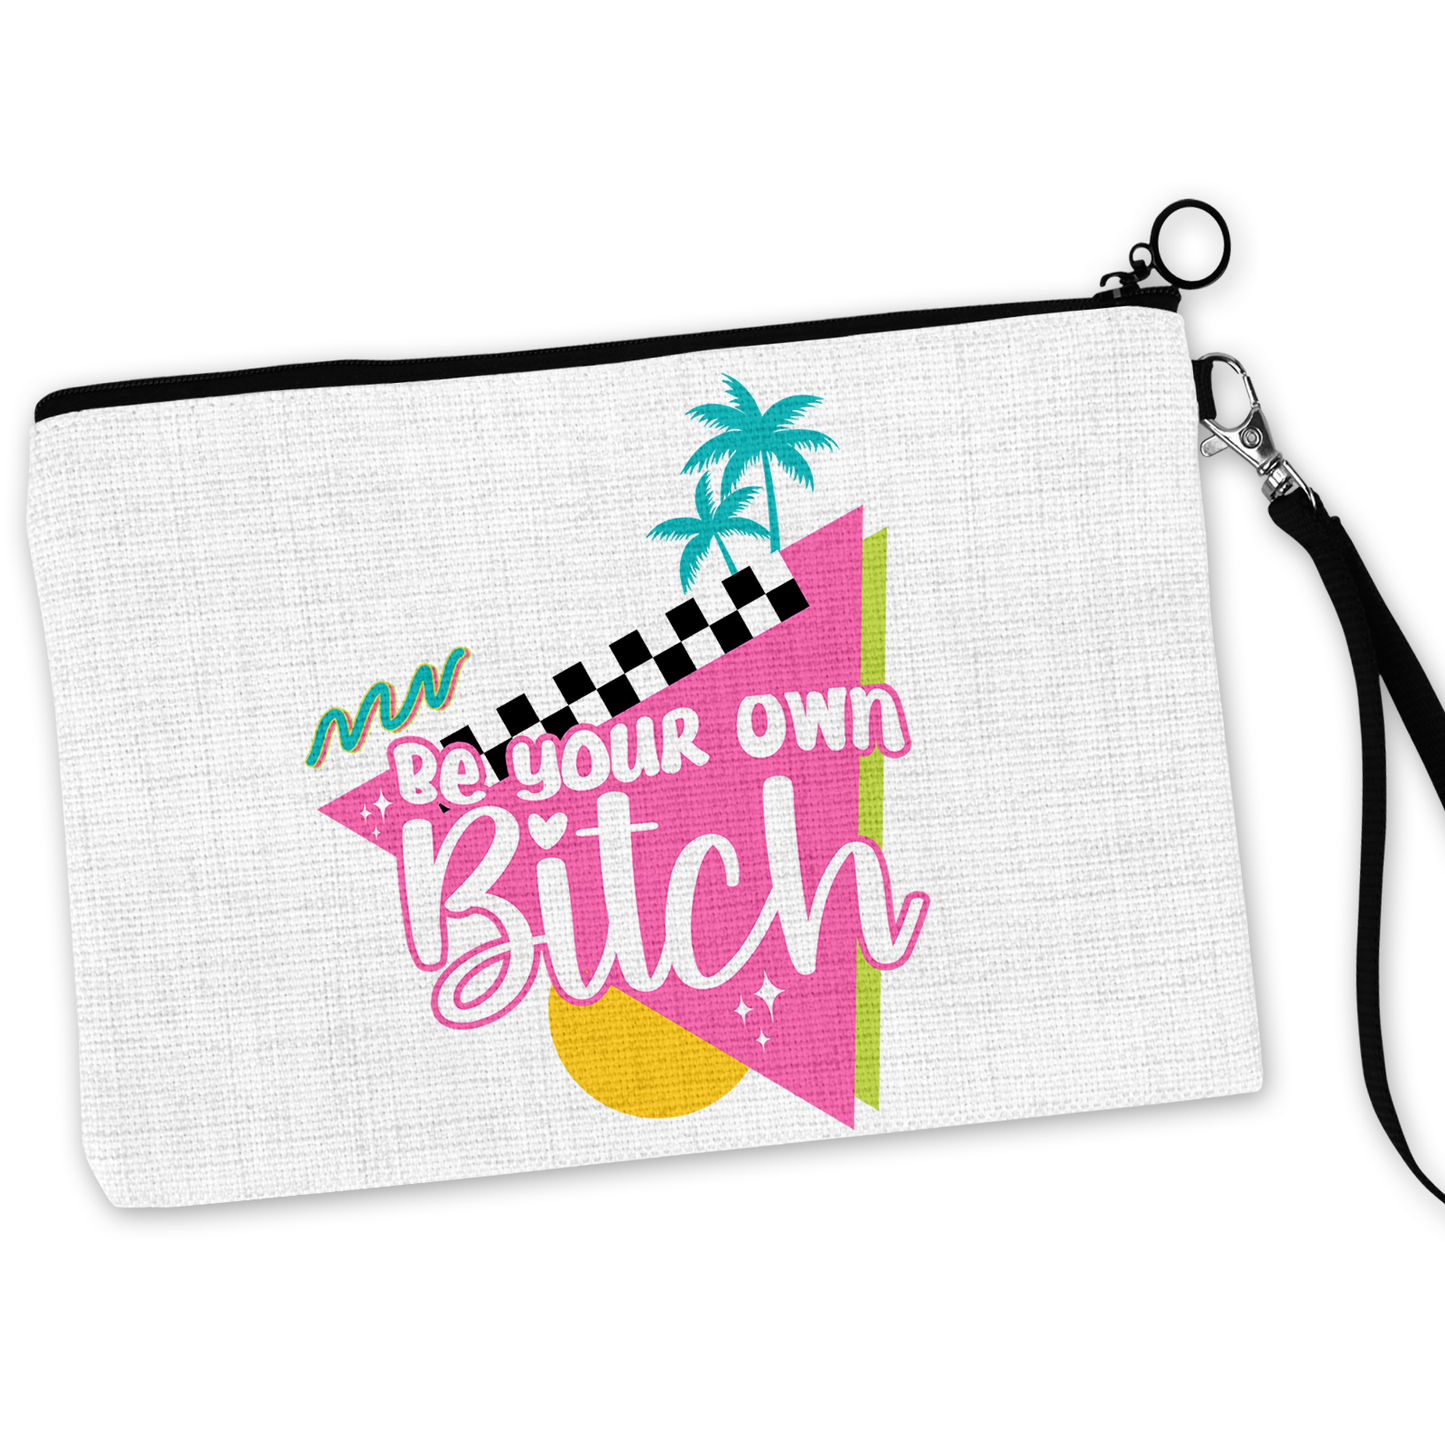 Be Your Own Bitch Cosmetic Bag